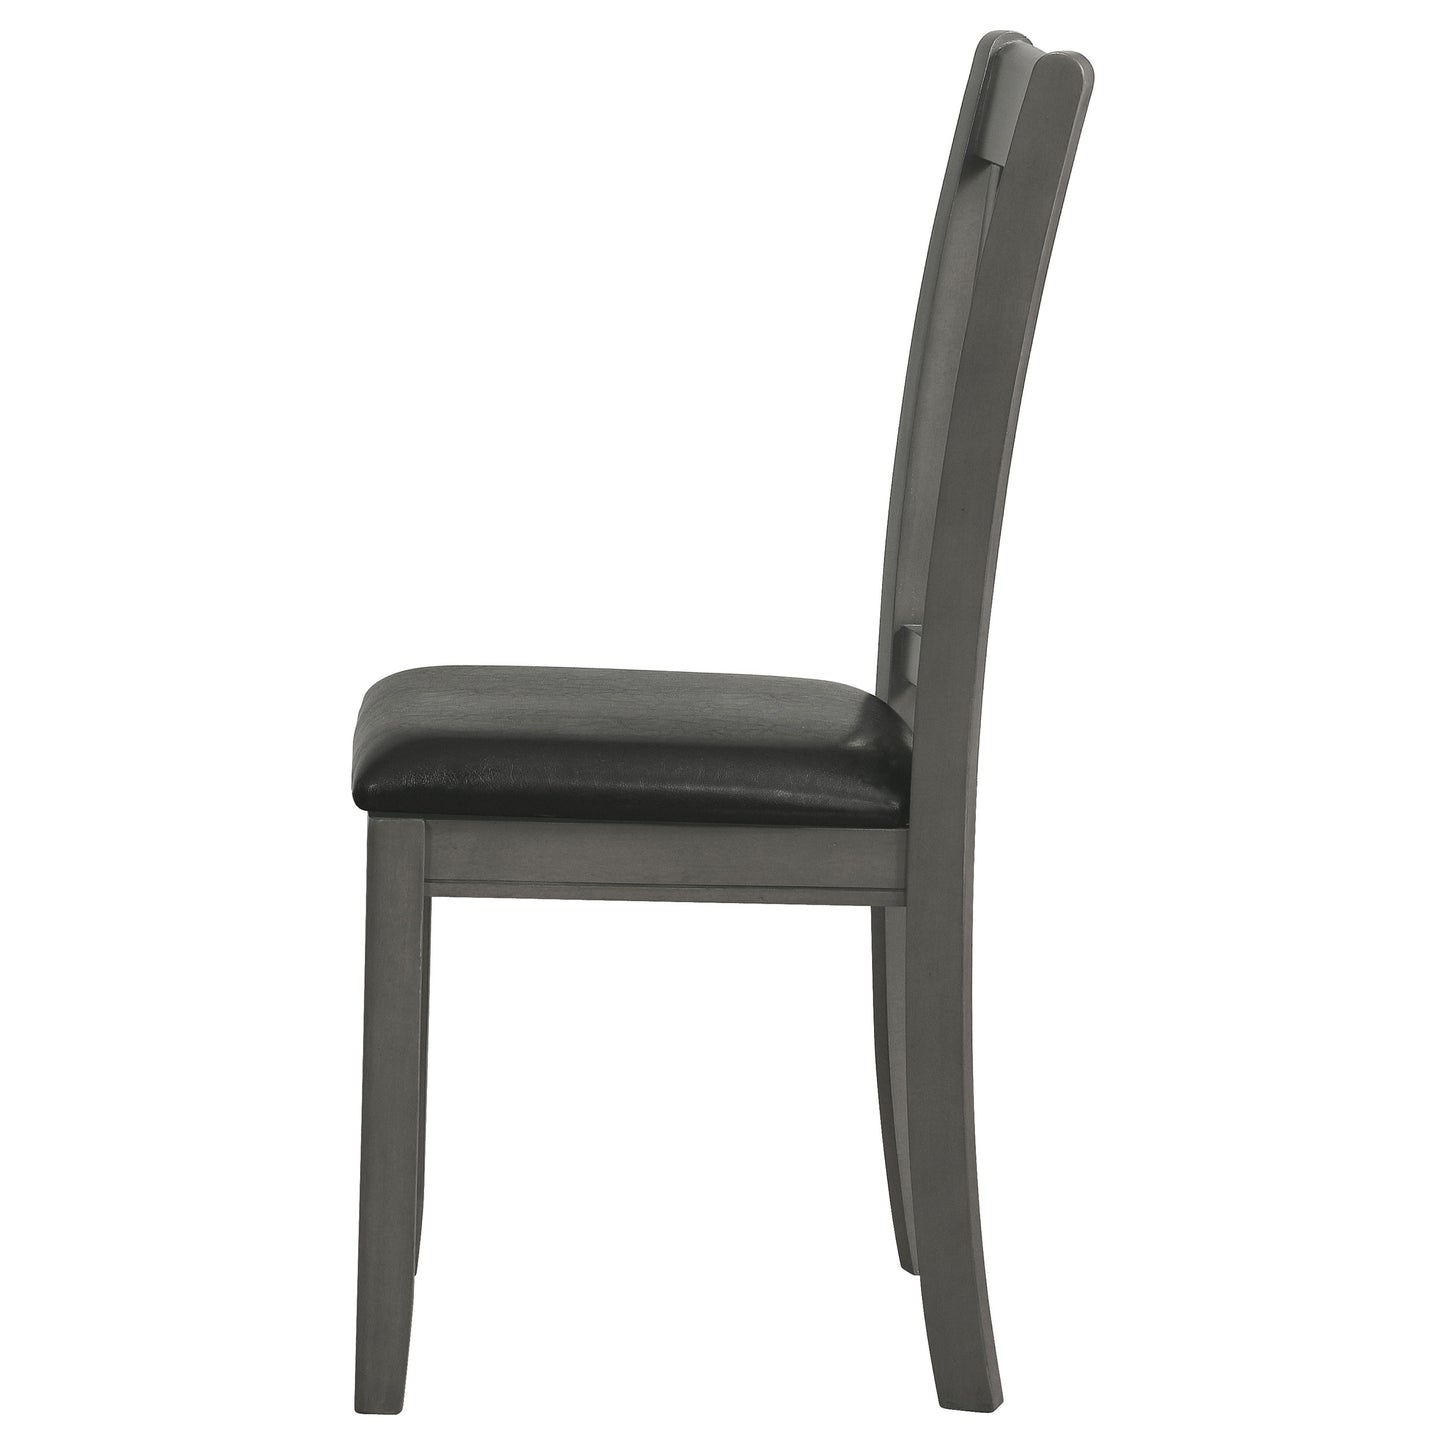 Lavon Padded Dining Side Chairs Medium Grey and Black (Set of 2)